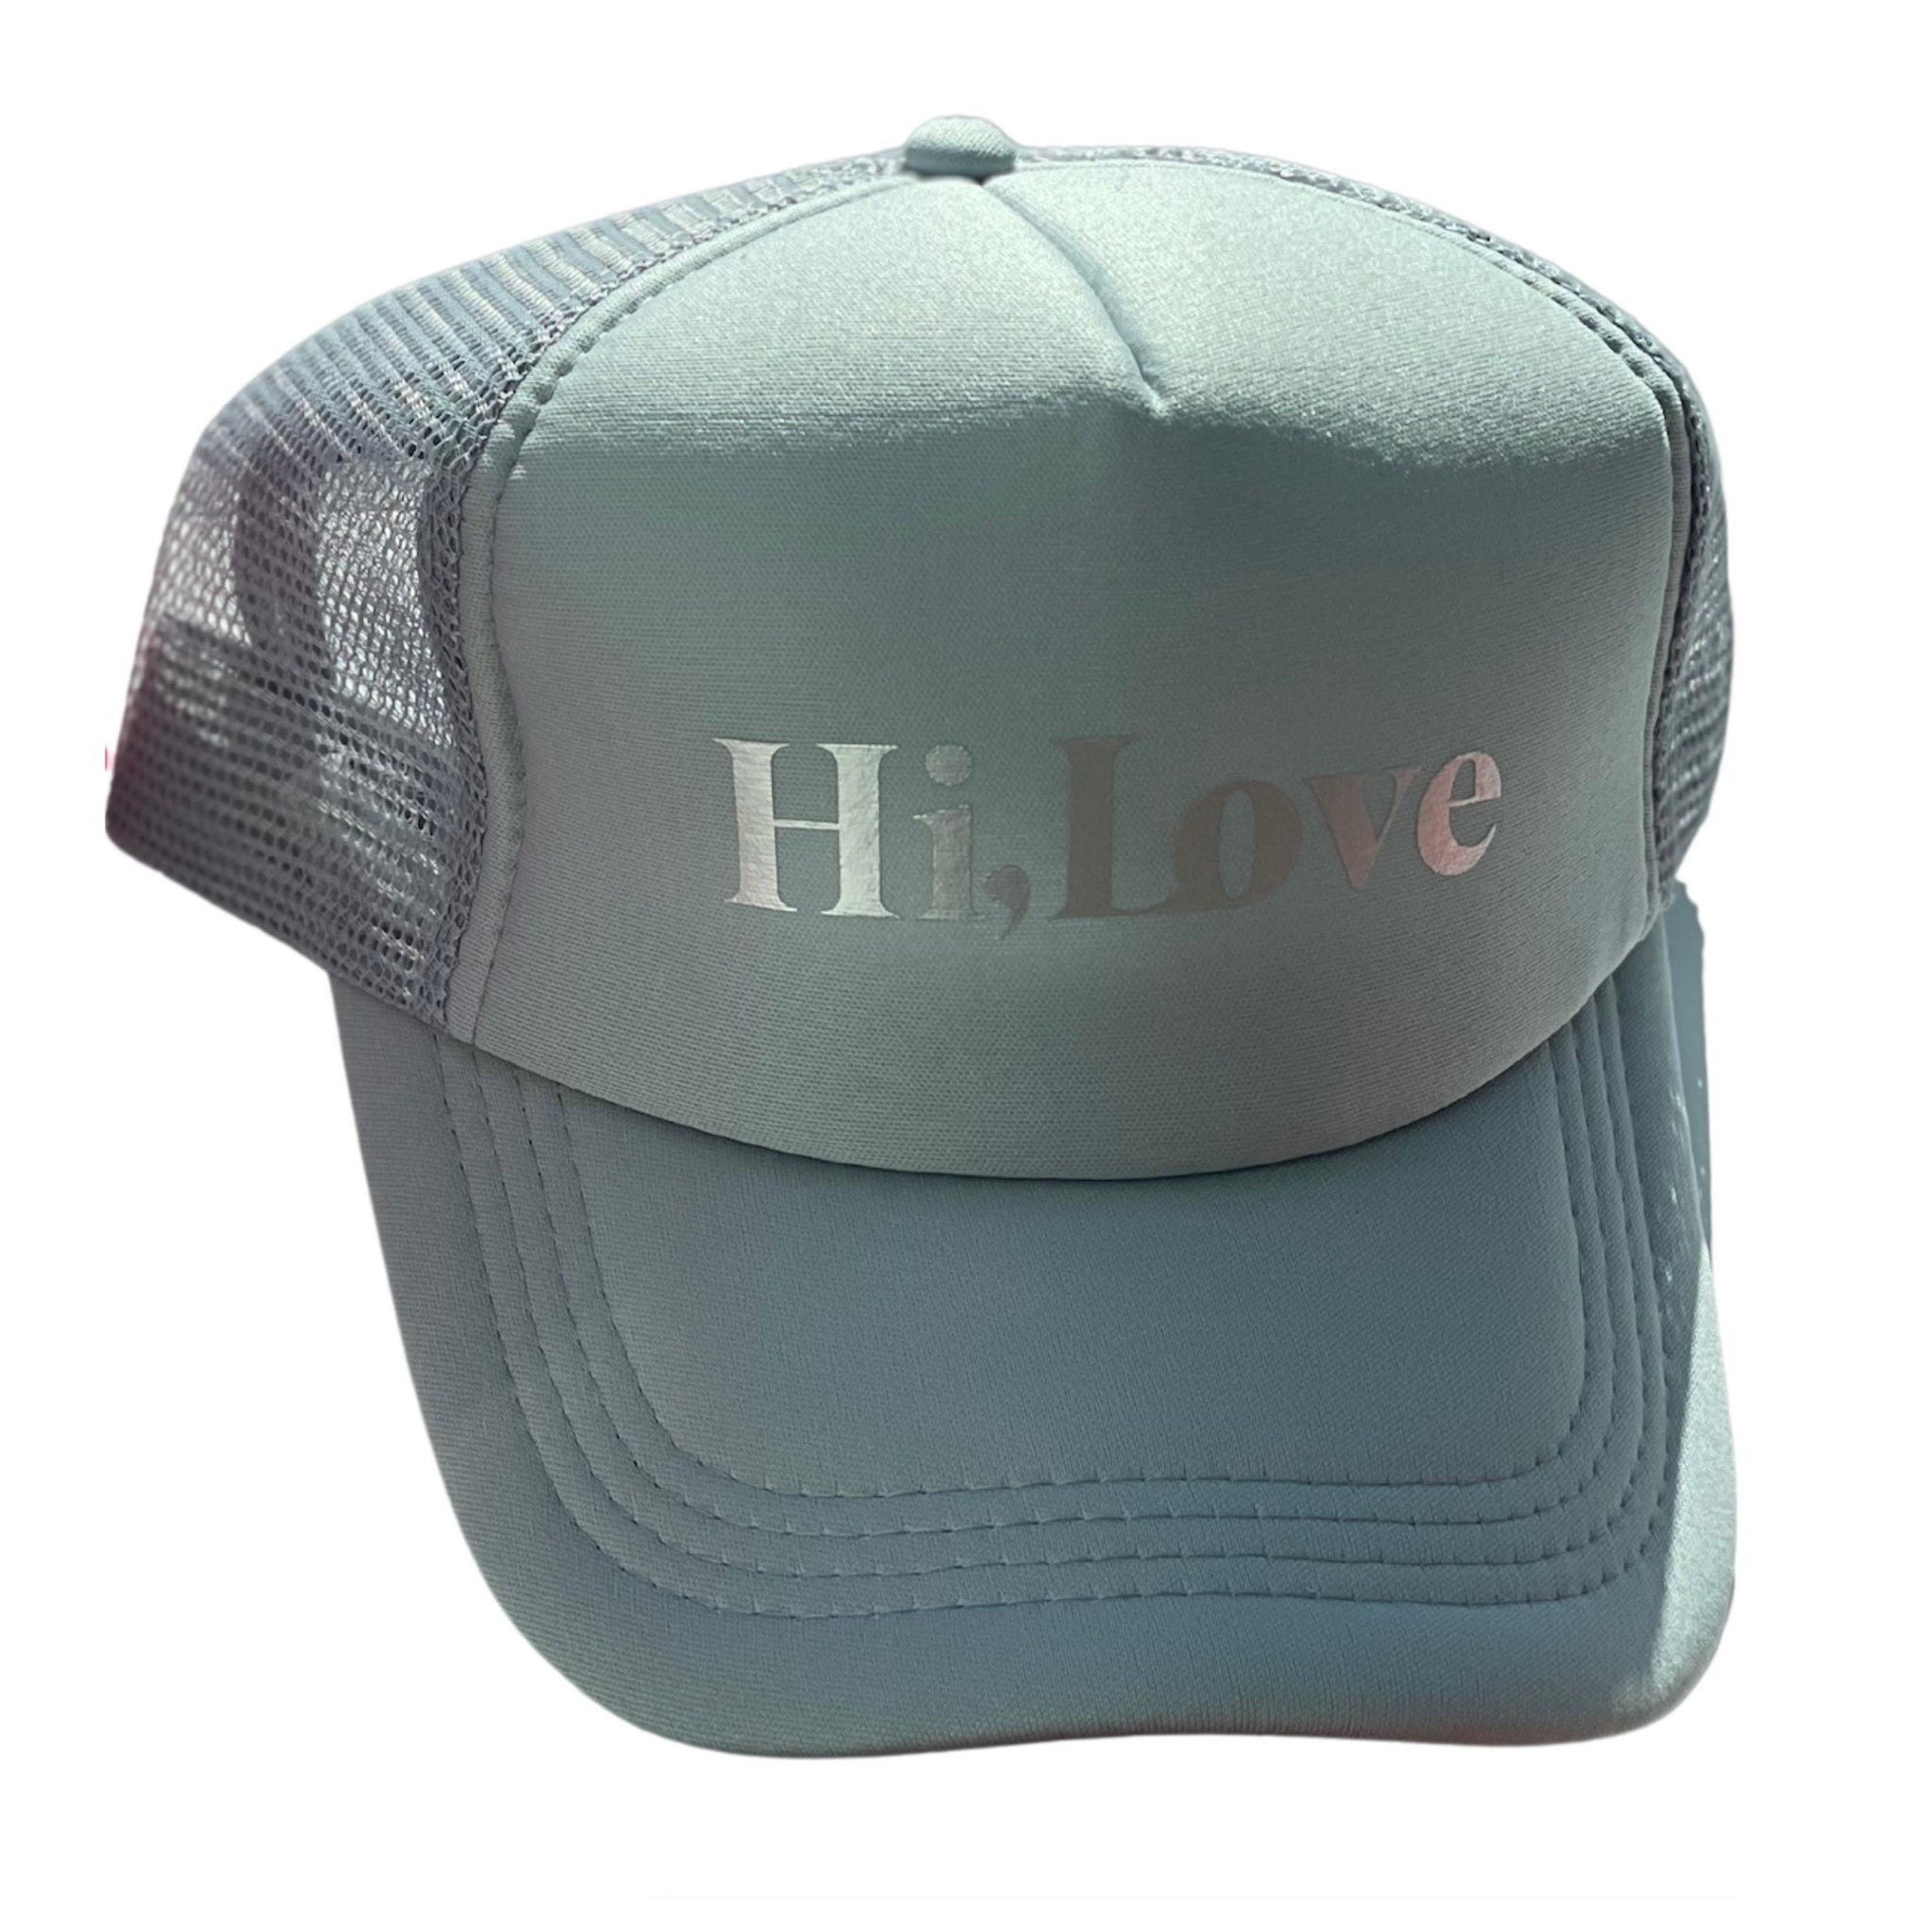 Hat - Silverwood Gray with Silver "Hi Love"